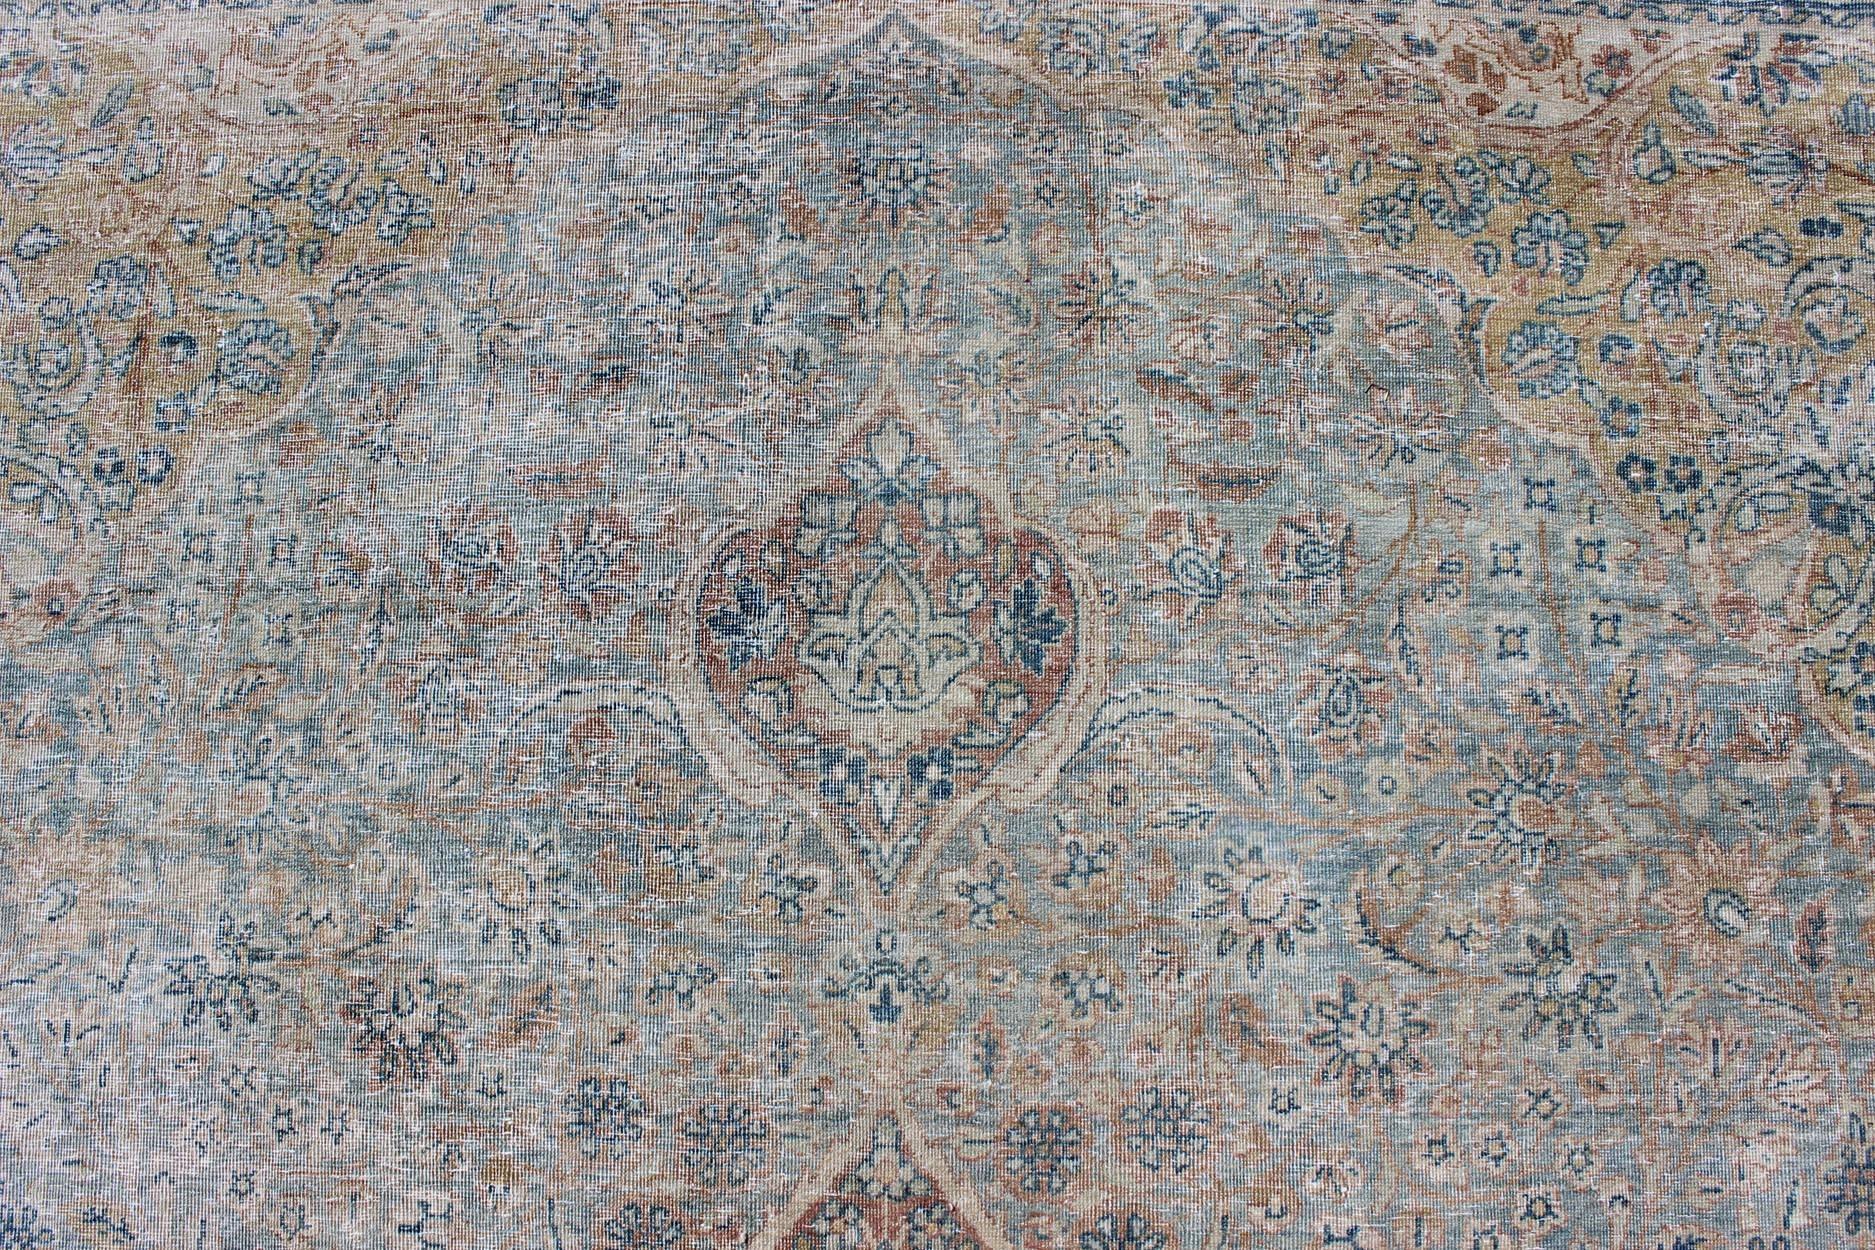 Early 20th Century Antique Persian Tabriz Rug with Medallion Design in Grayish Blue, Gold, Brown